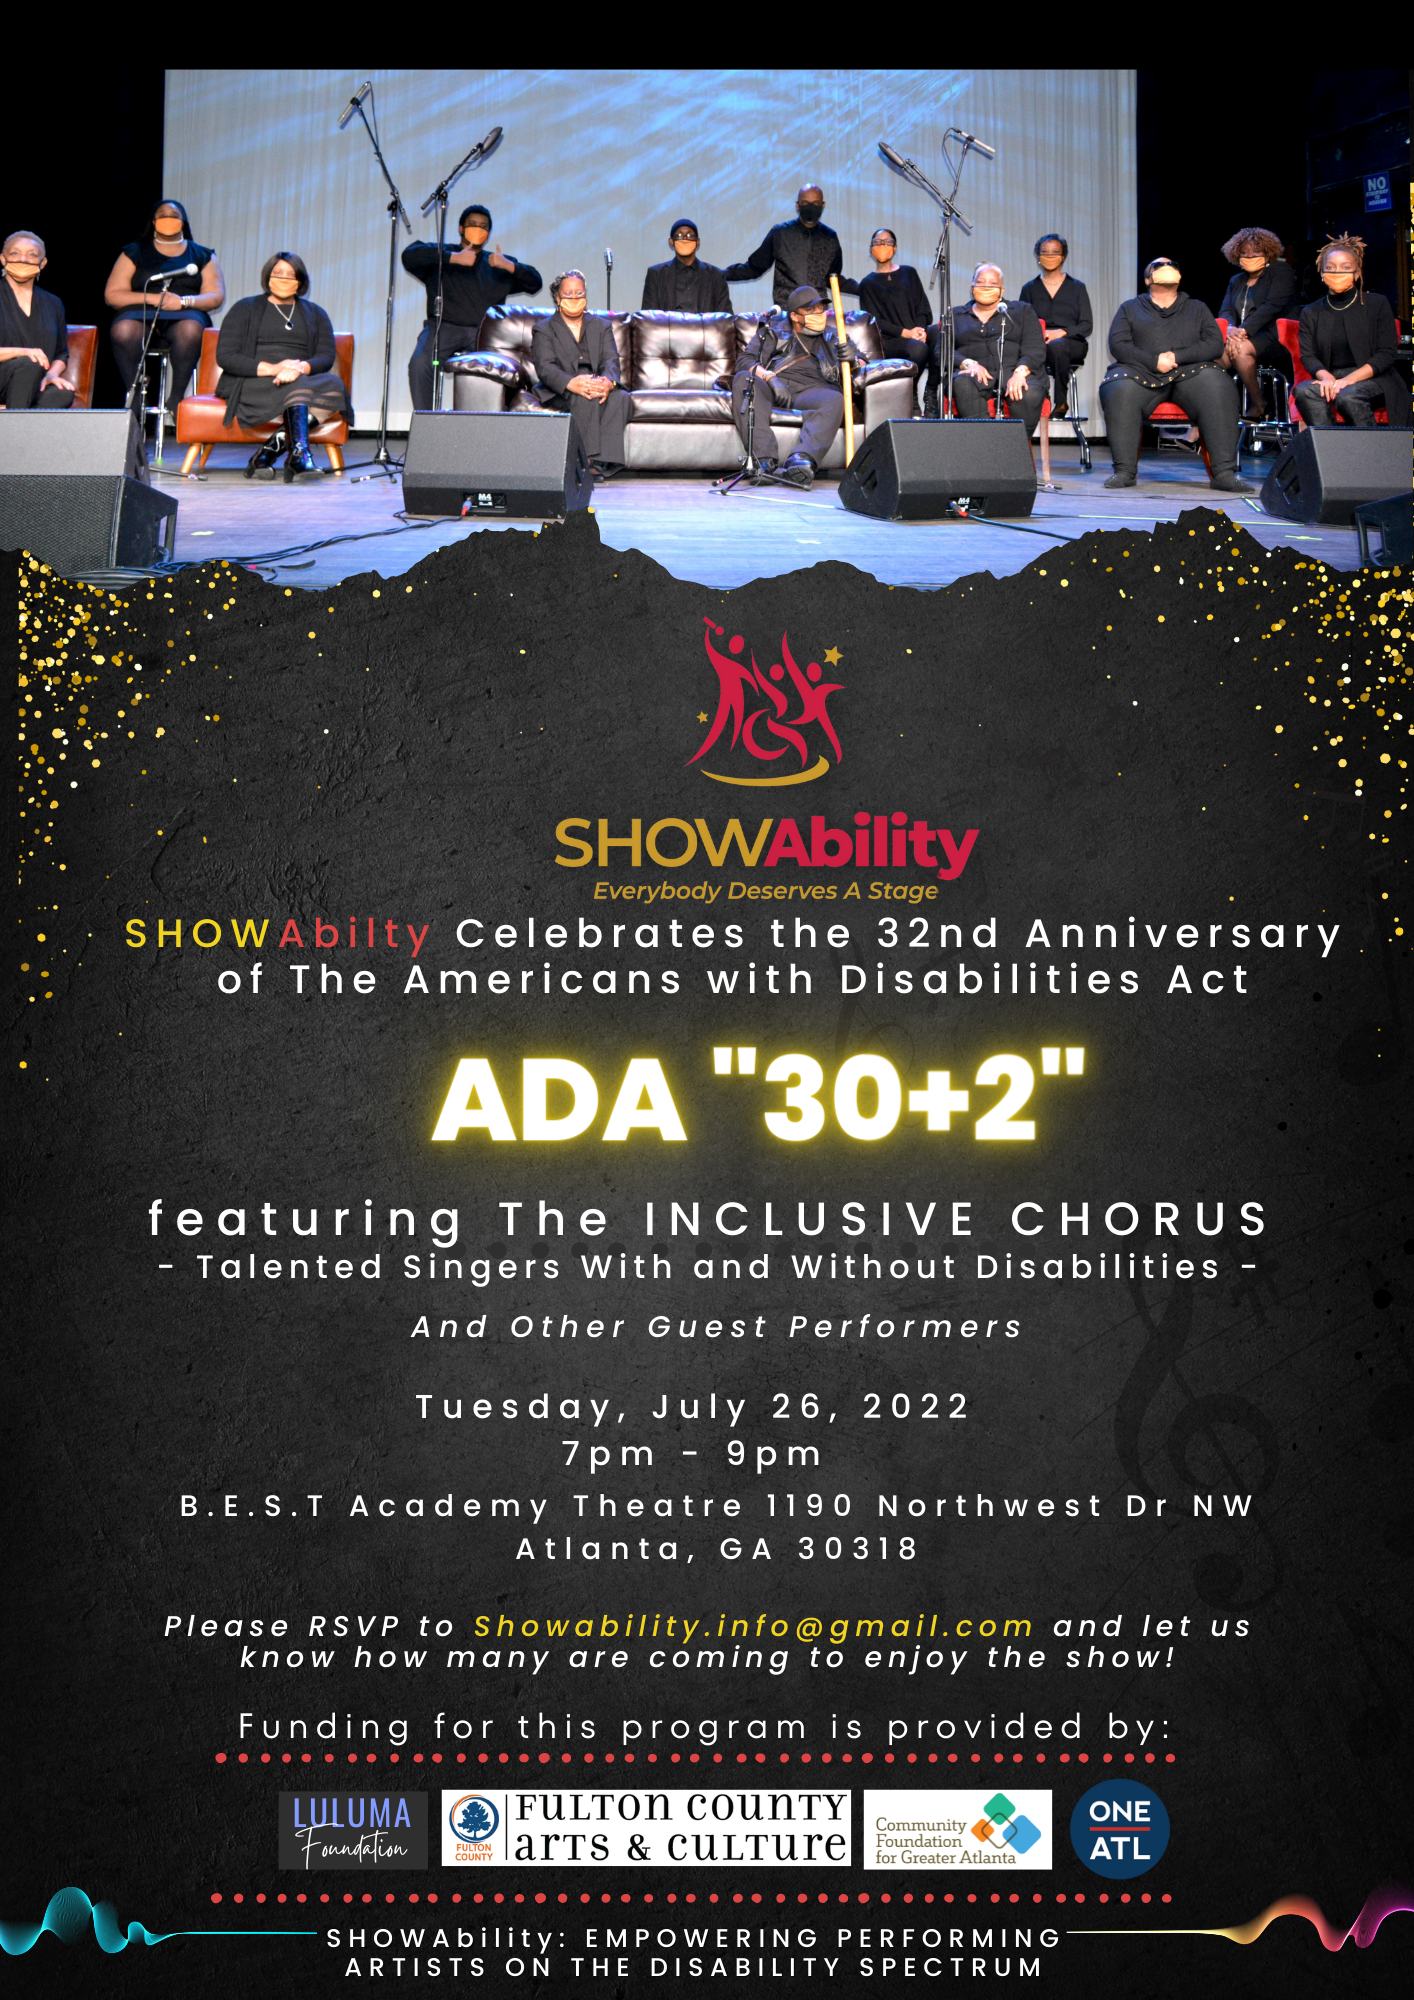 ADA 30+2 flyer with an image of the inclusive chorus and details for the event.